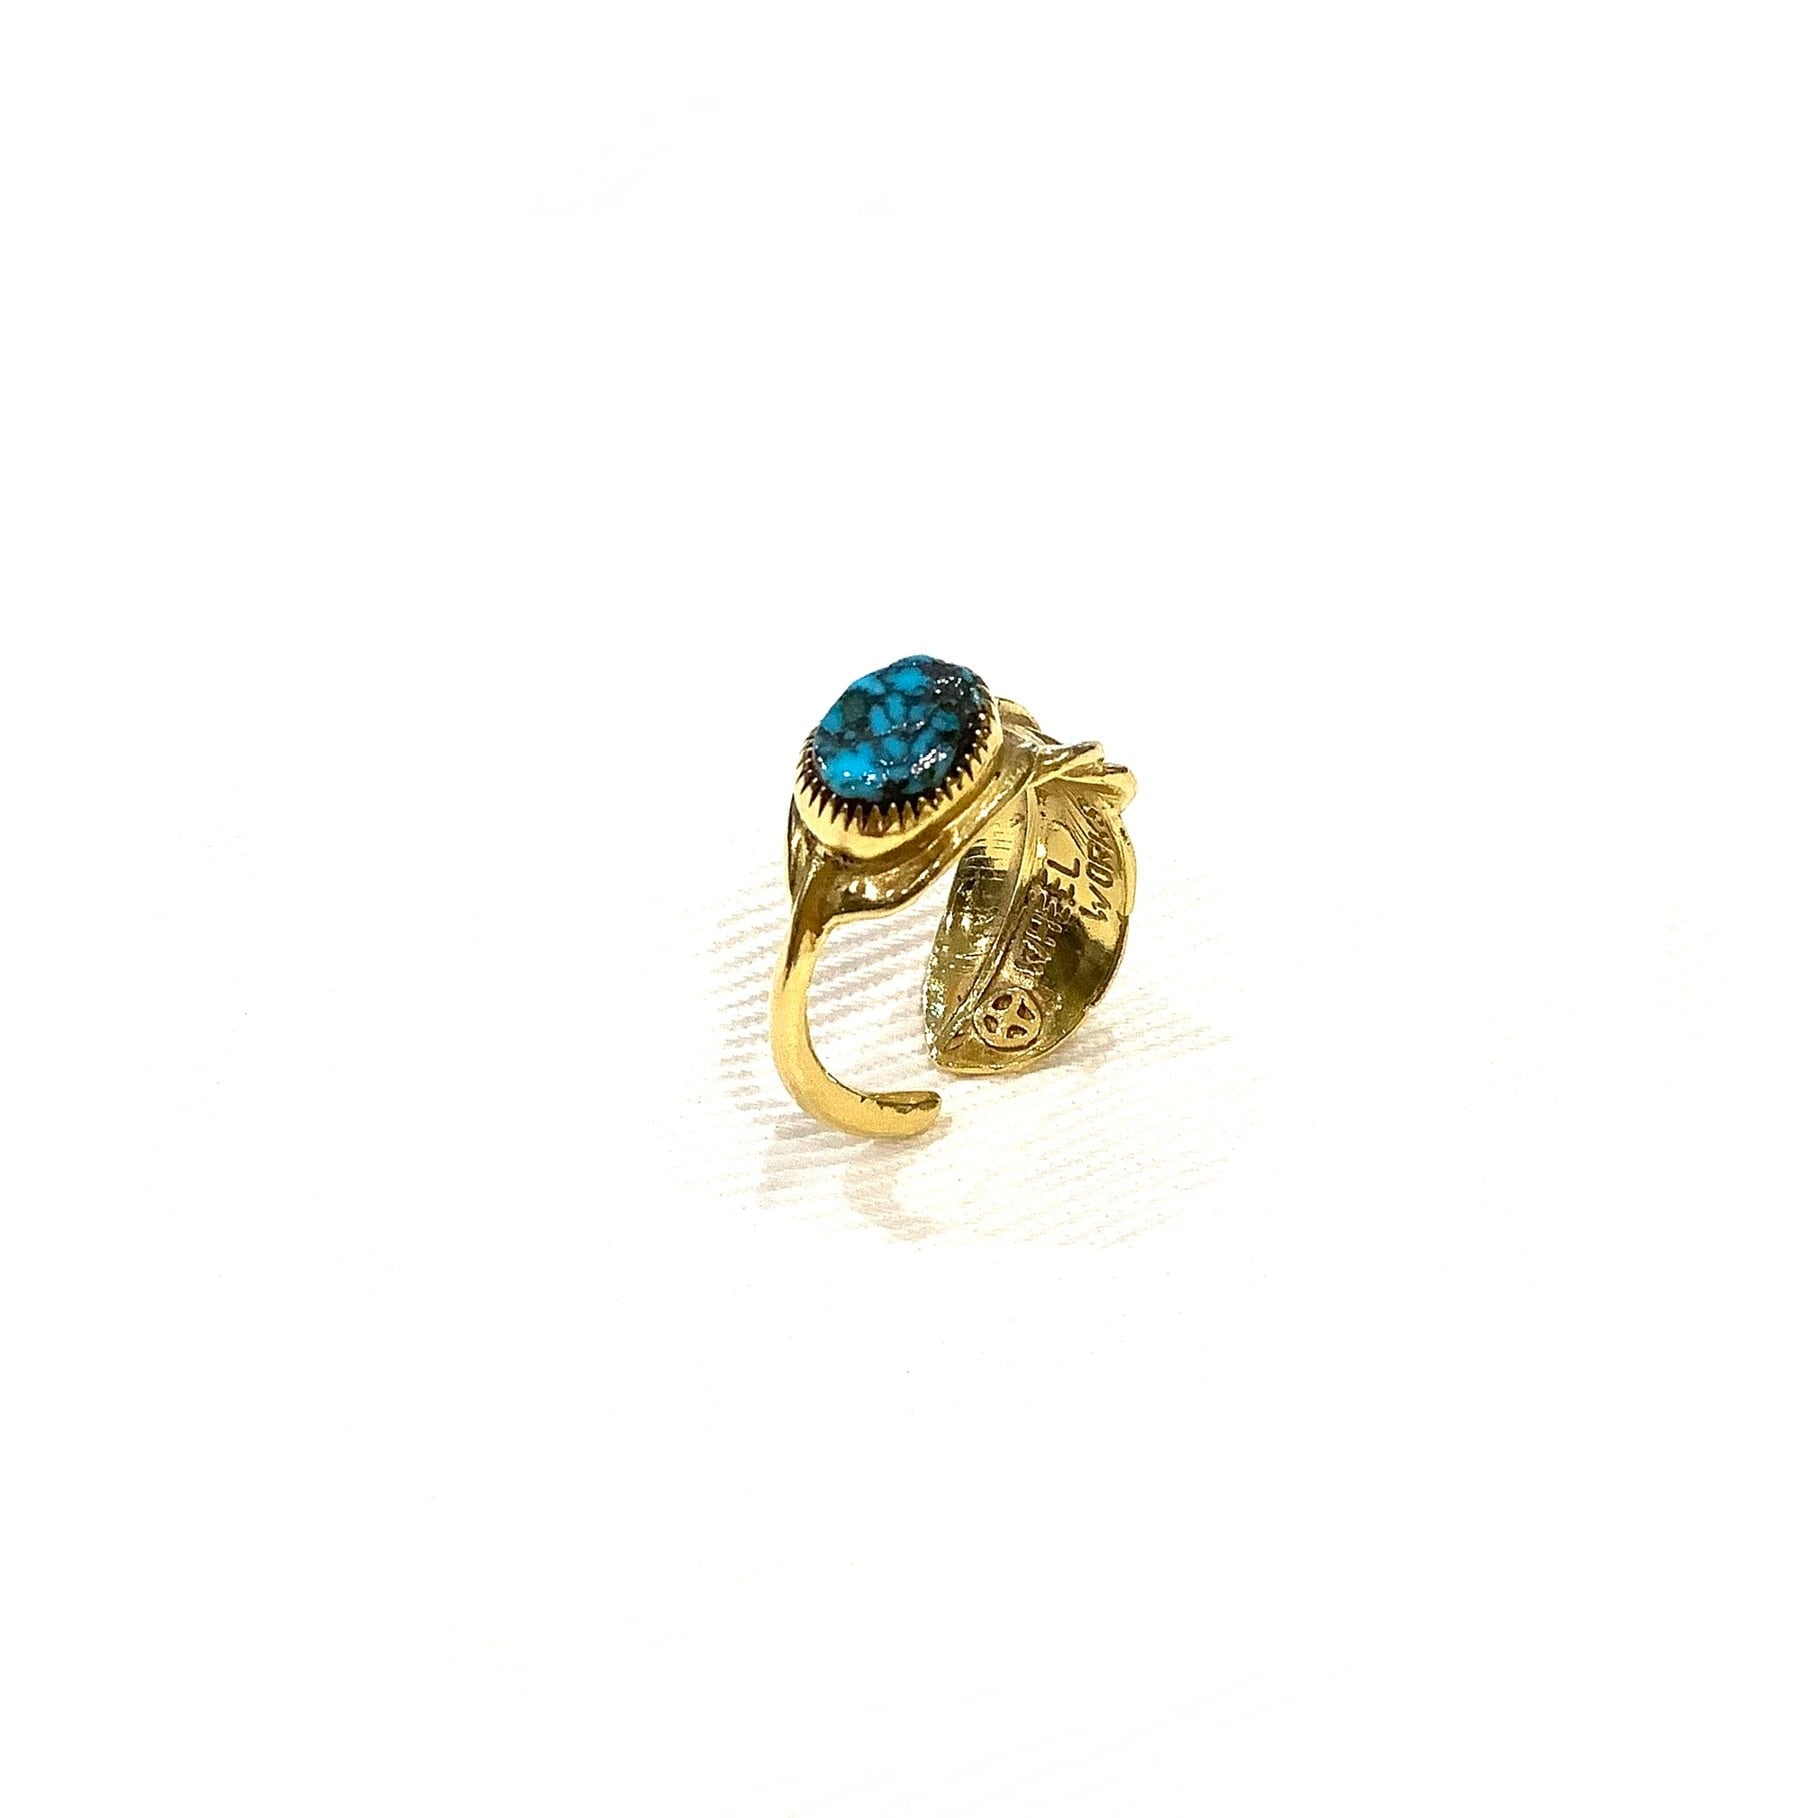 WHEEL WORKS ホイールワークス Red Mountain Turquoise K18Gold Feather Ring レッドマウンテン  ターコイズ イーグル フェザー リング GOLD 18K K18 インディアンジュエリー | FirstOrderJewelry